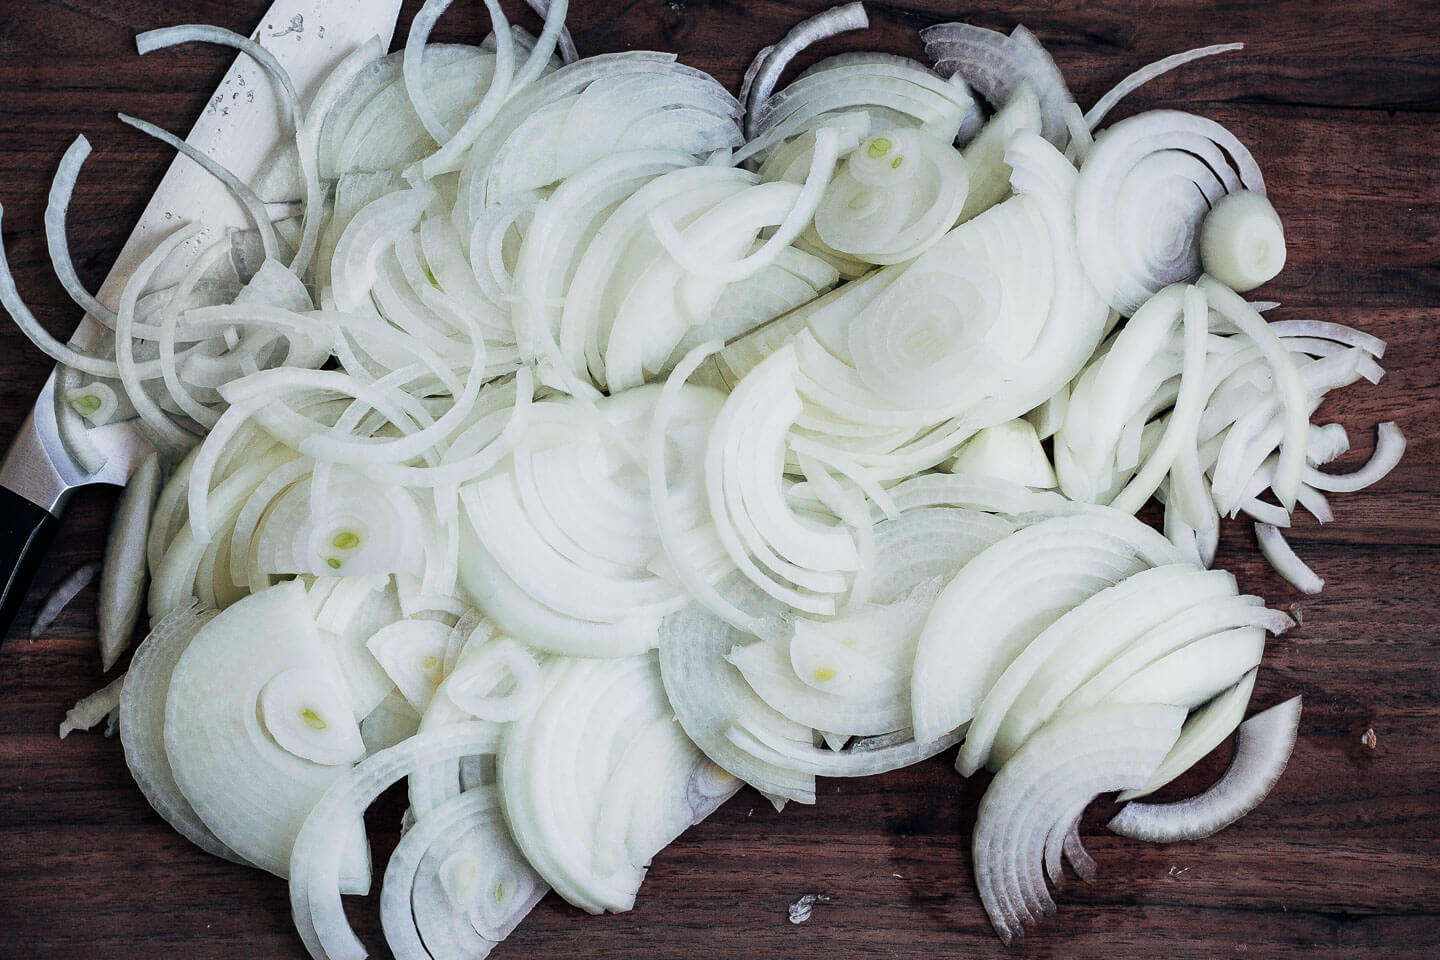 Sliced yellow onions on a cutting board.